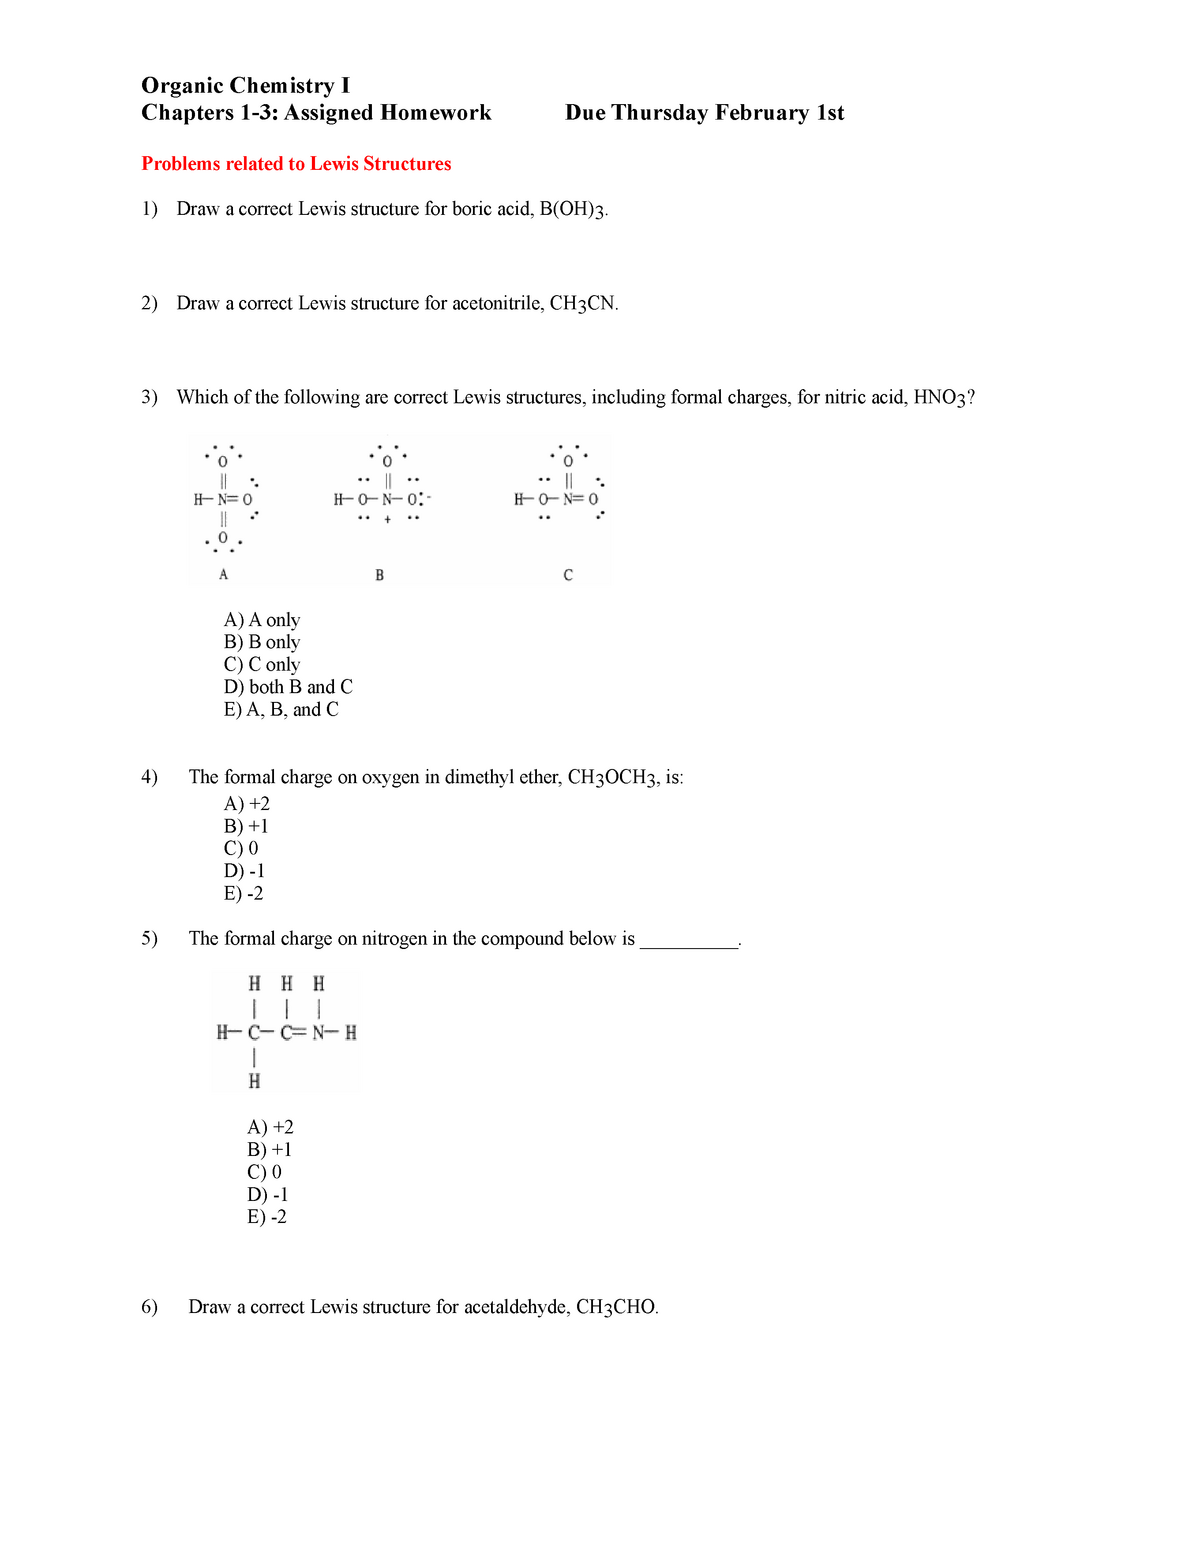 How to Draw the Lewis Structure for CH3 (Methyl anion